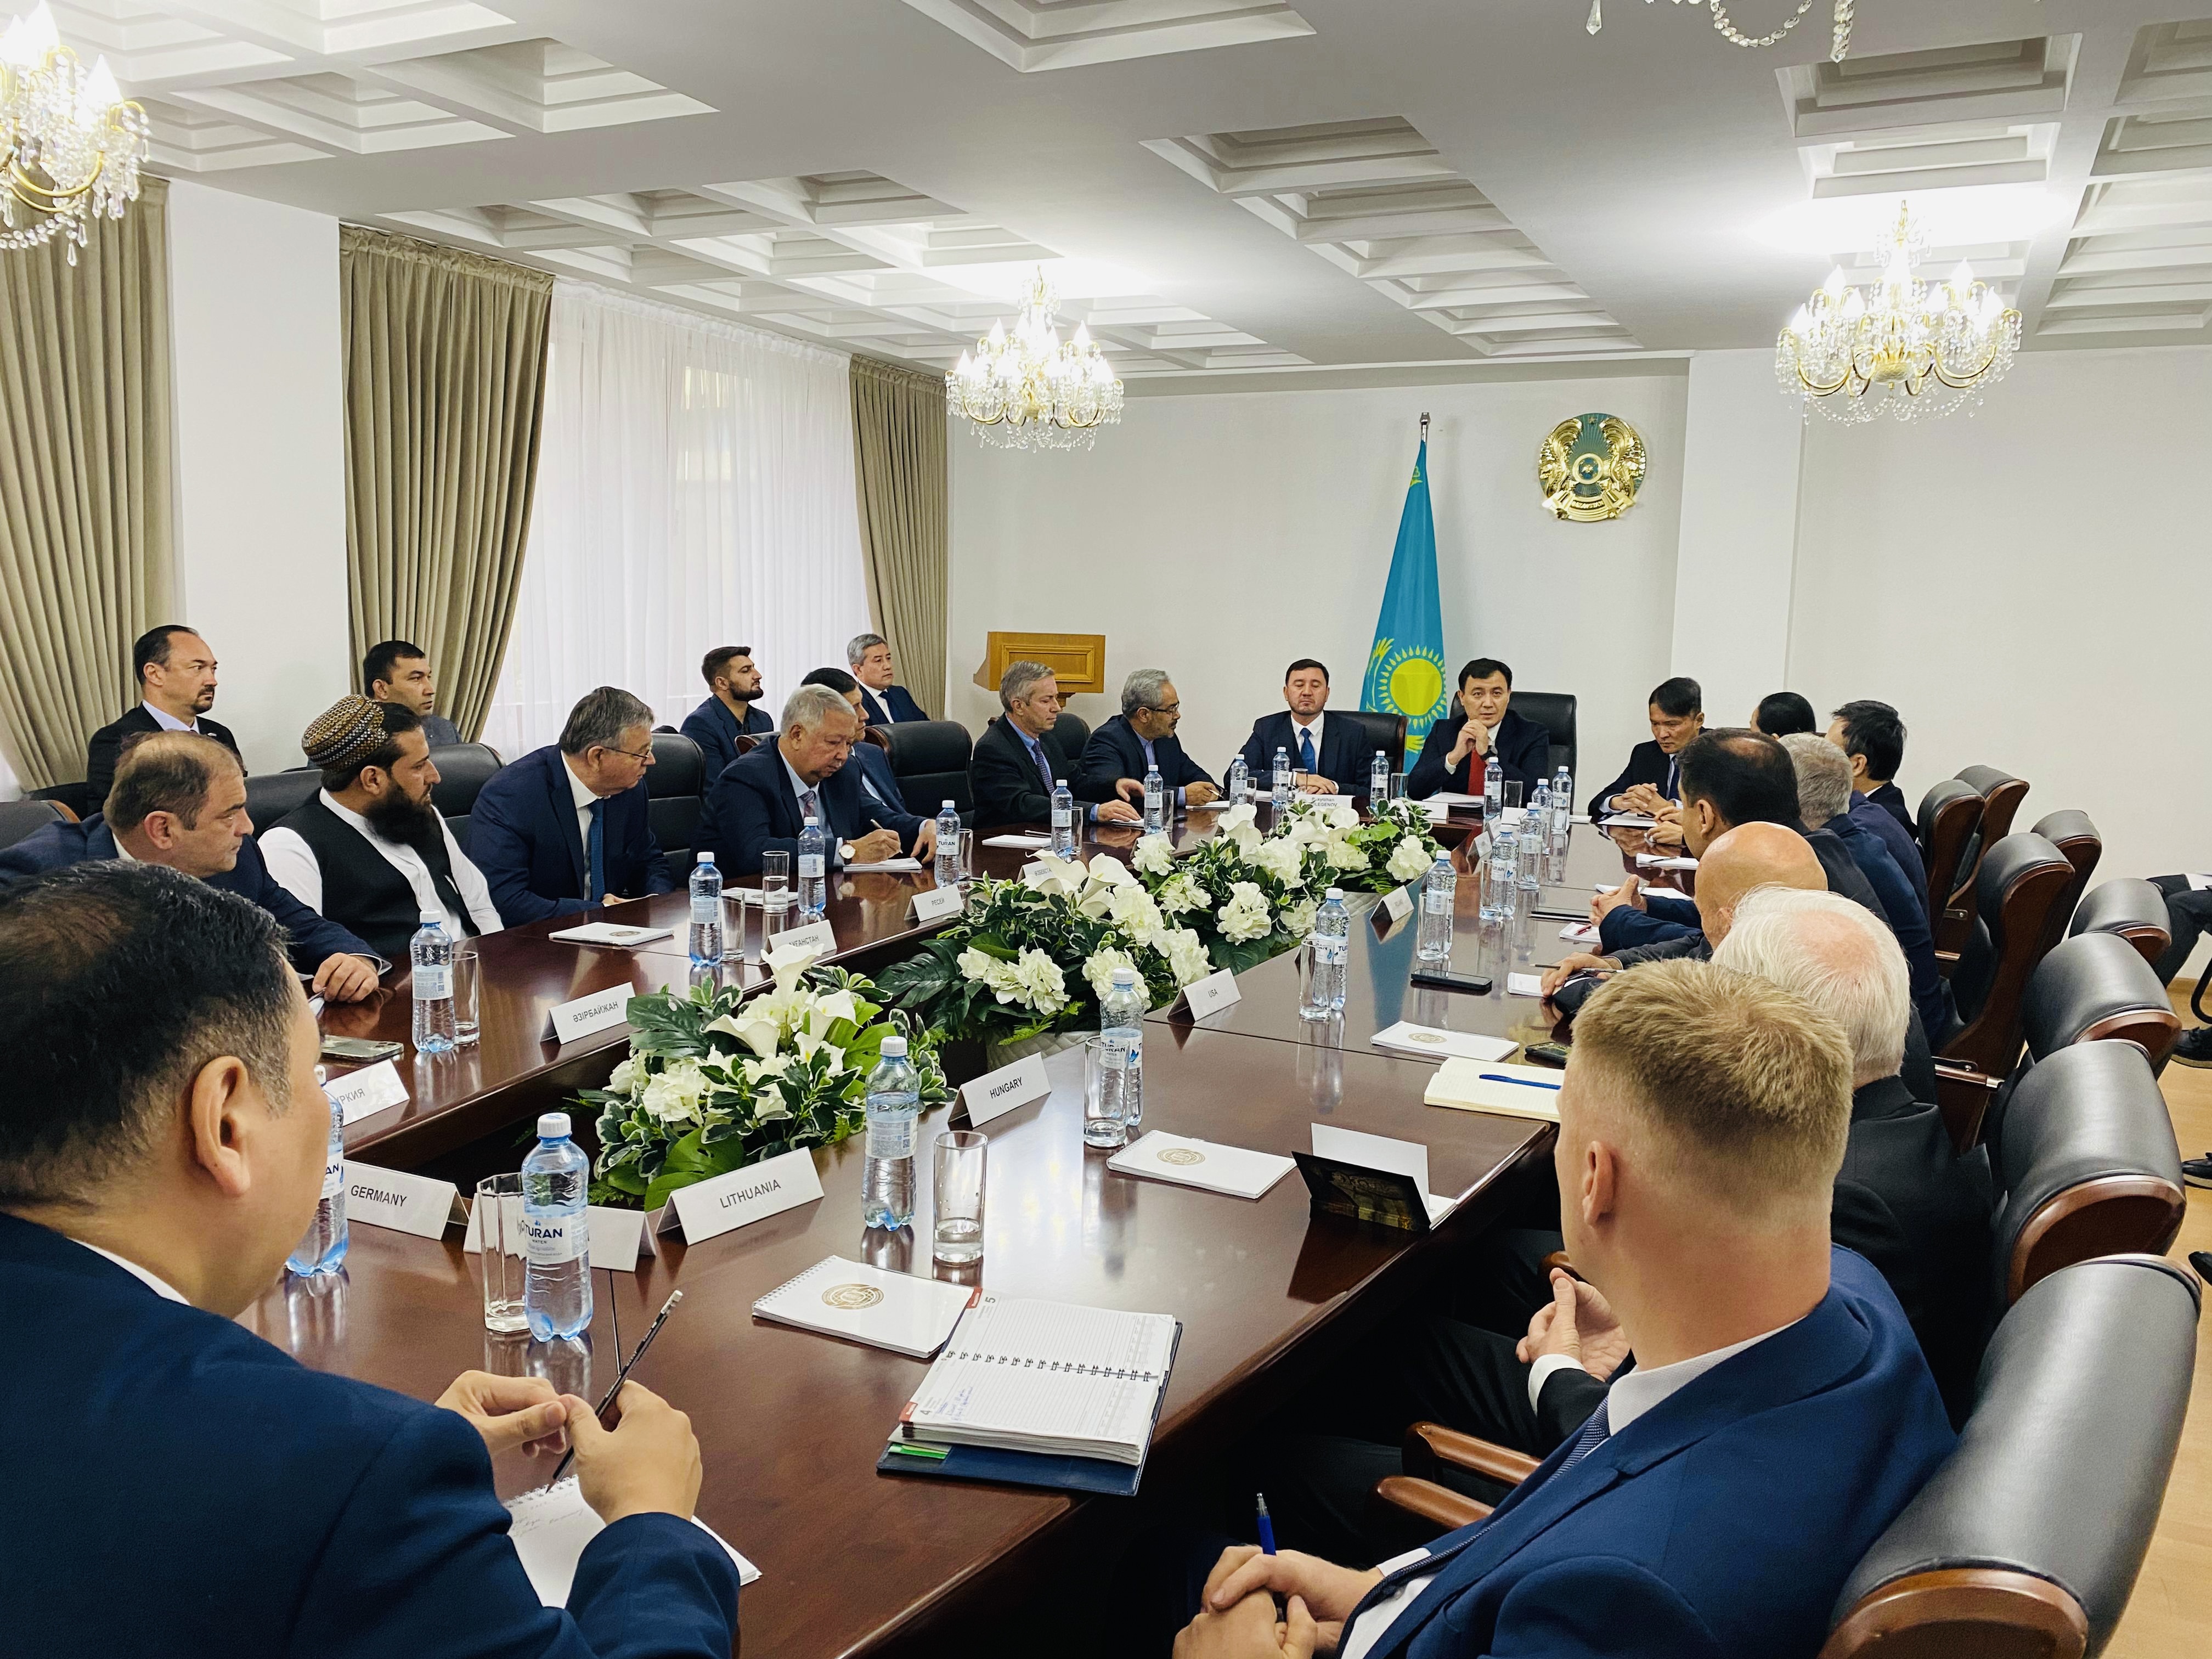 Meeting with the diplomatic corps accredited in Almaty